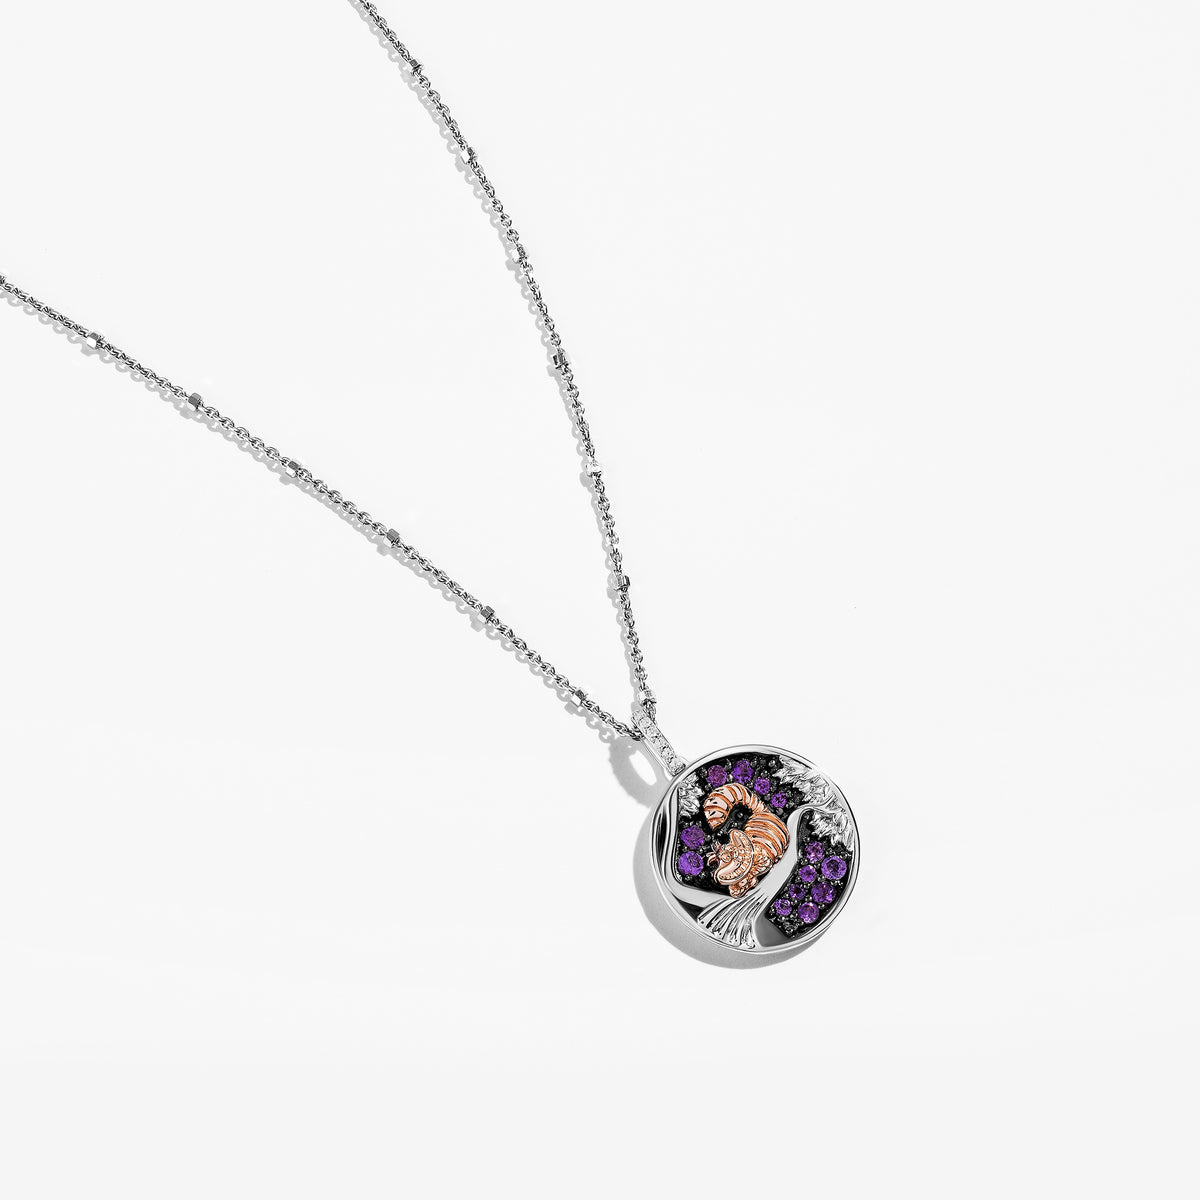 Disney The Little Mermaid Iconic Inspired Diamond Coin Necklace Pendant in Sterling Silver and 10K Rose Gold 1/20 Cttw | Disney Fine Jewelry